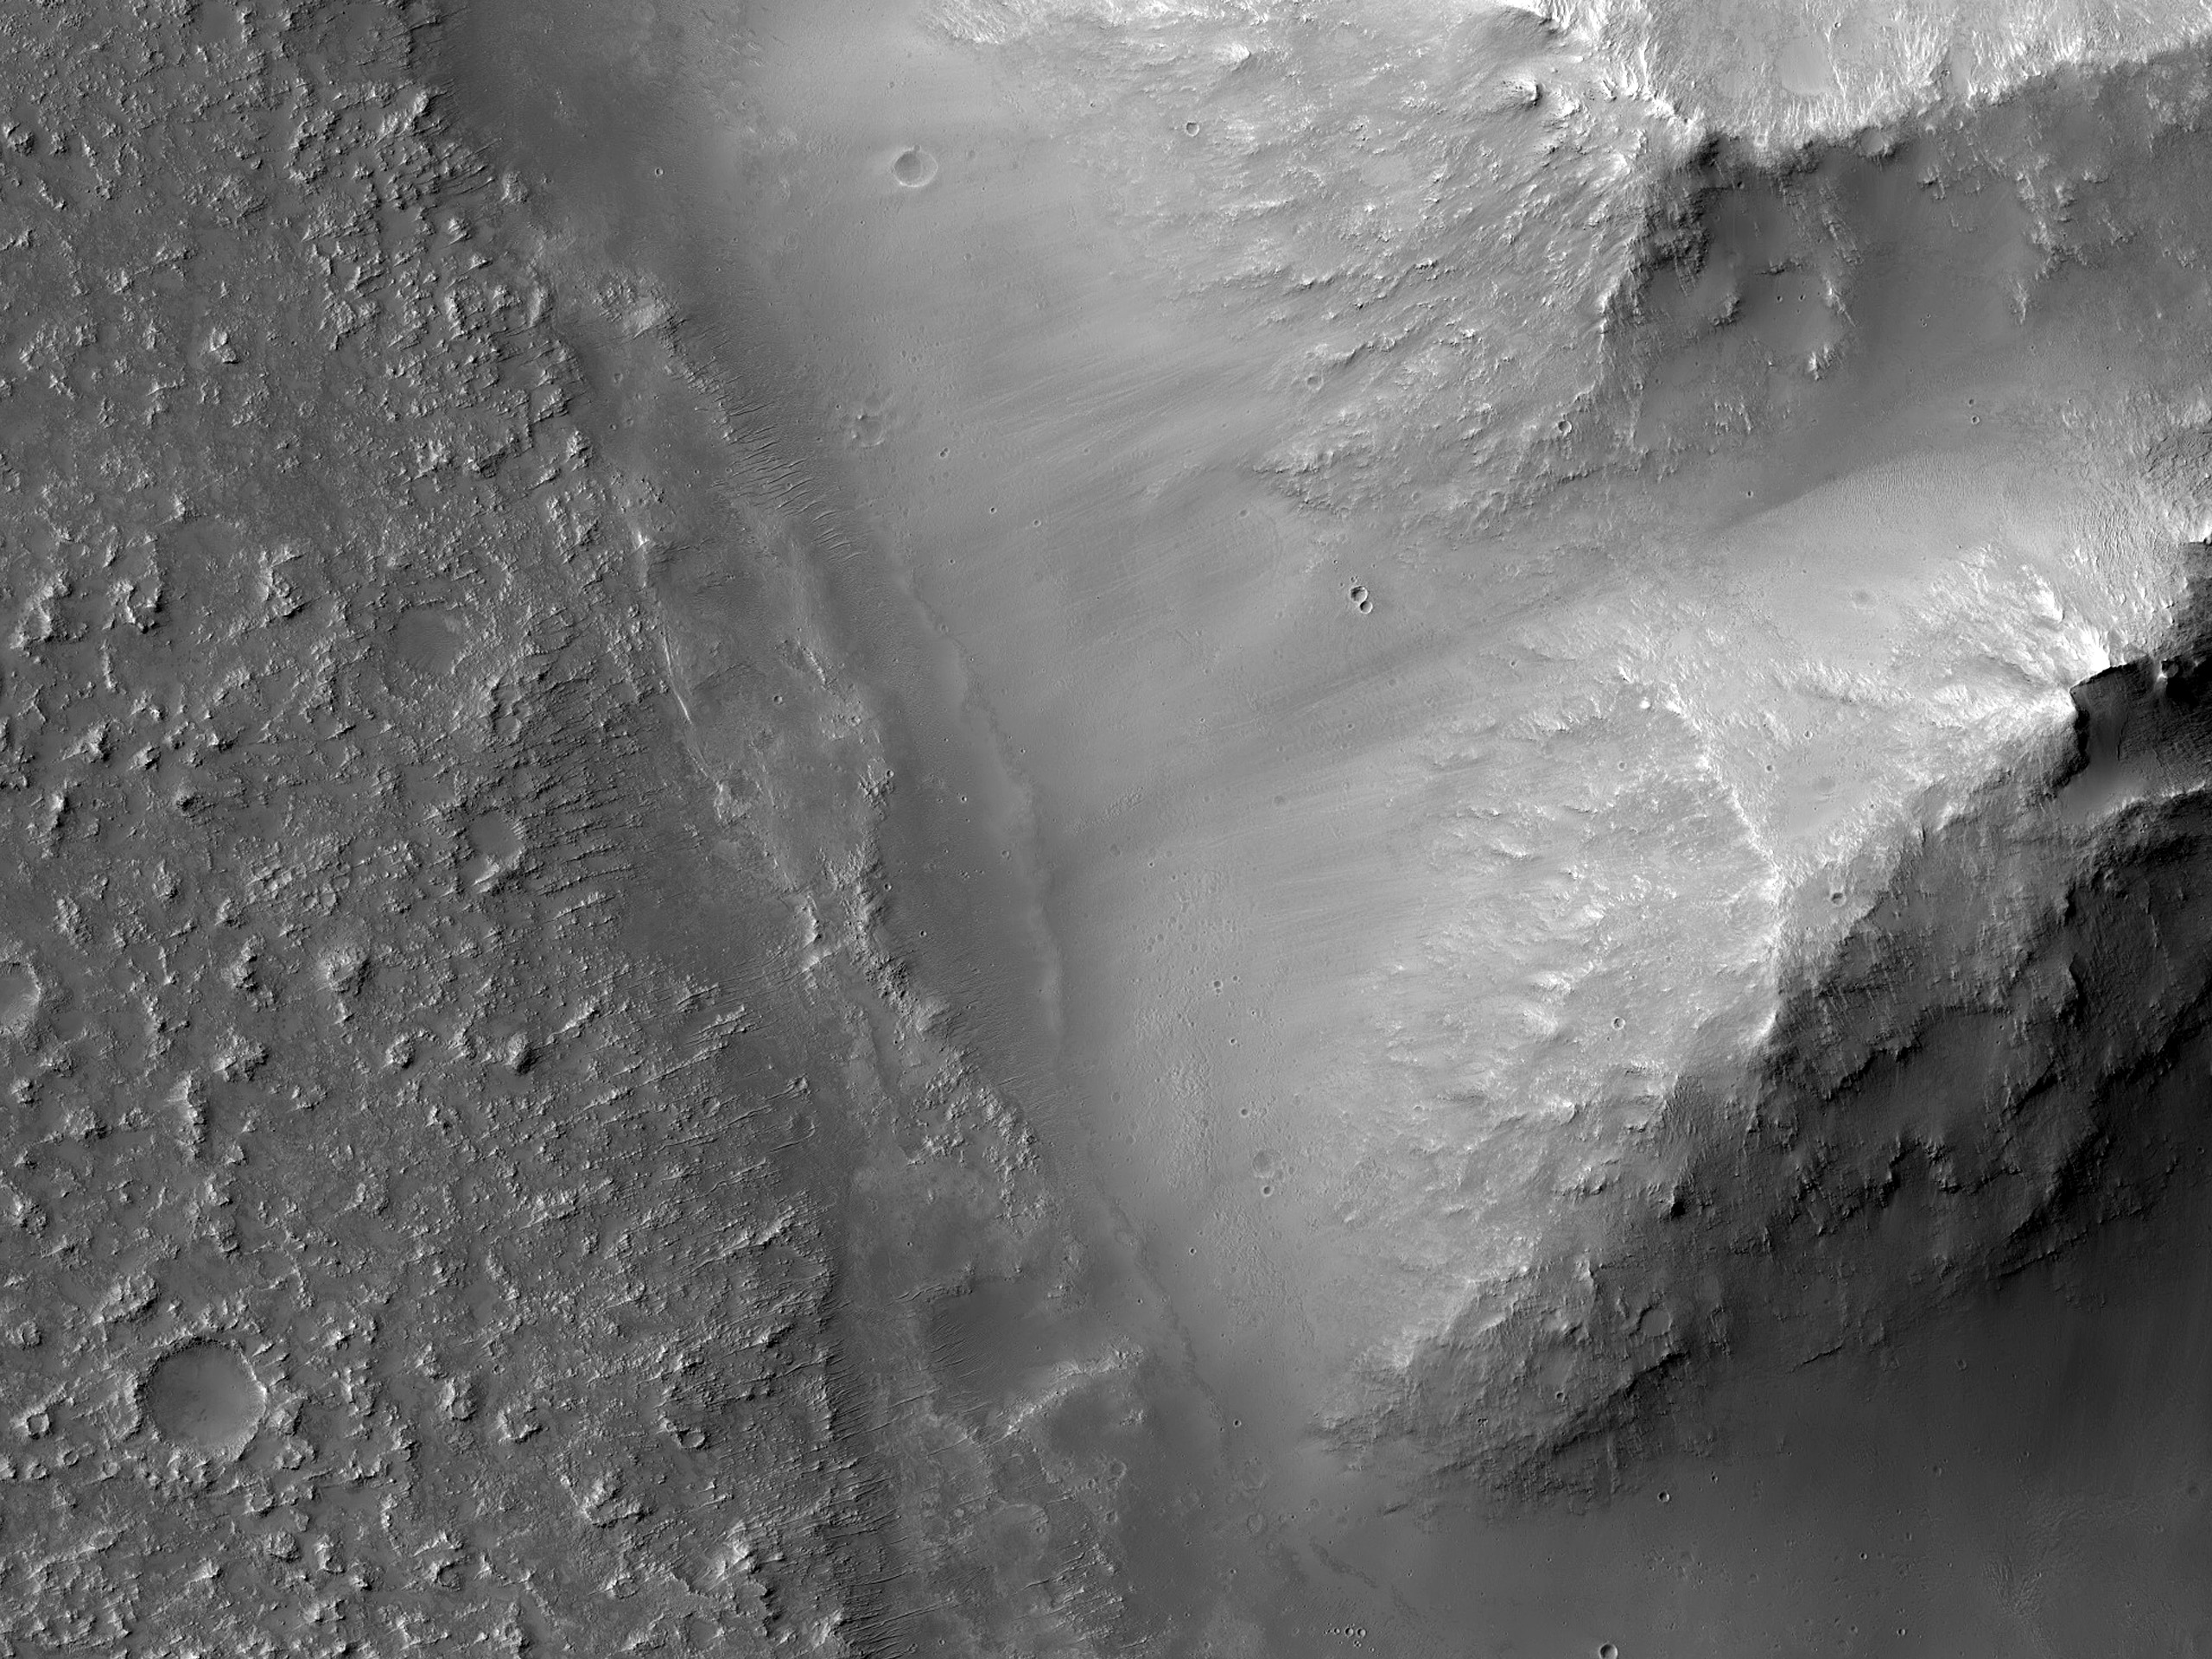 Lobate Flows in Huygens Crater